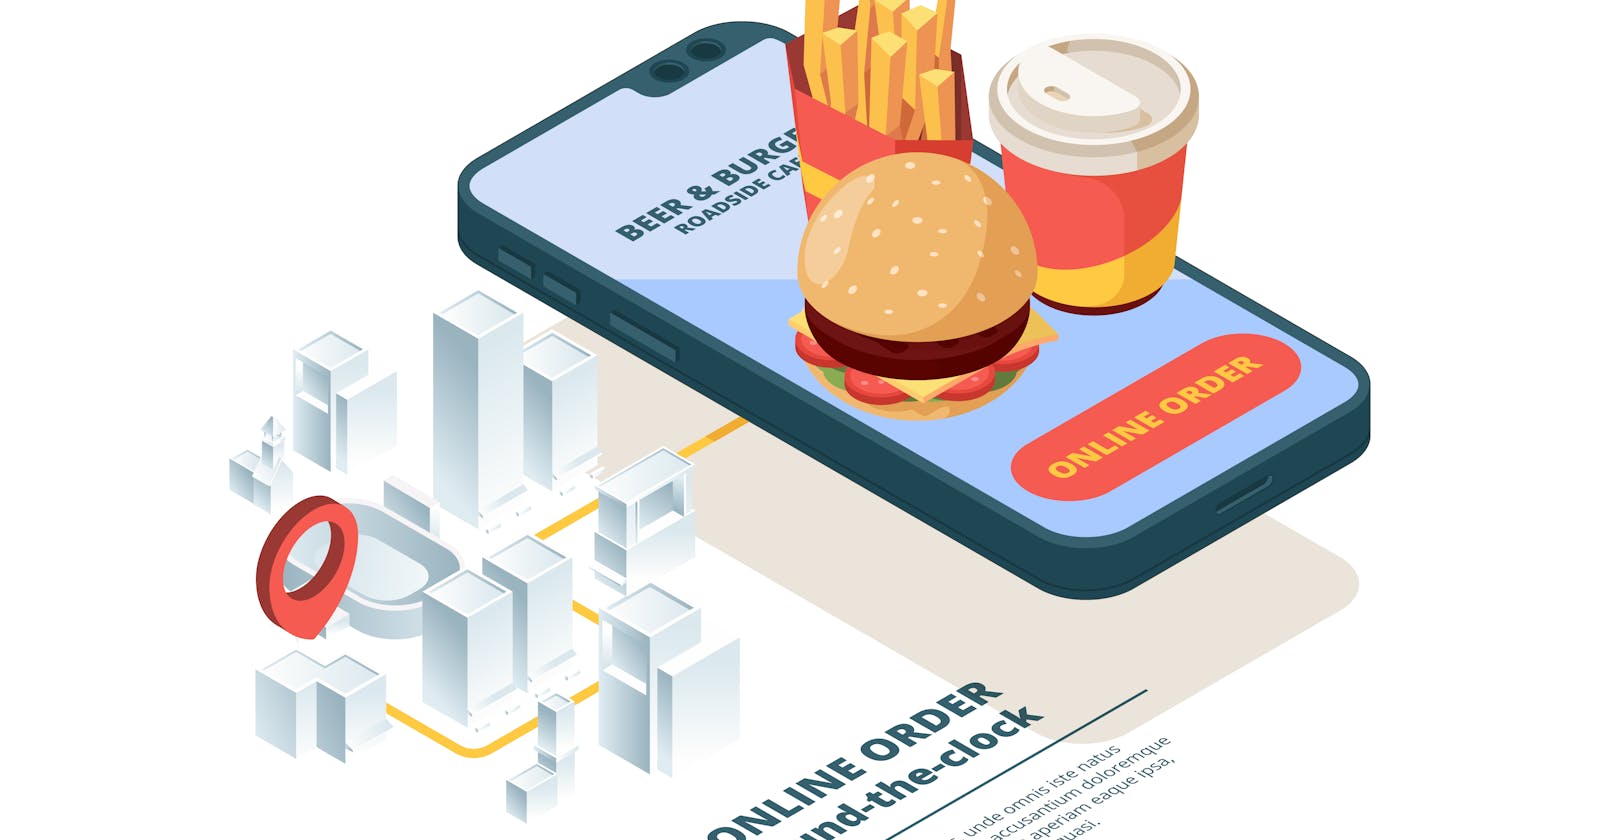 Understanding Food Delivery App Architecture and Functionality